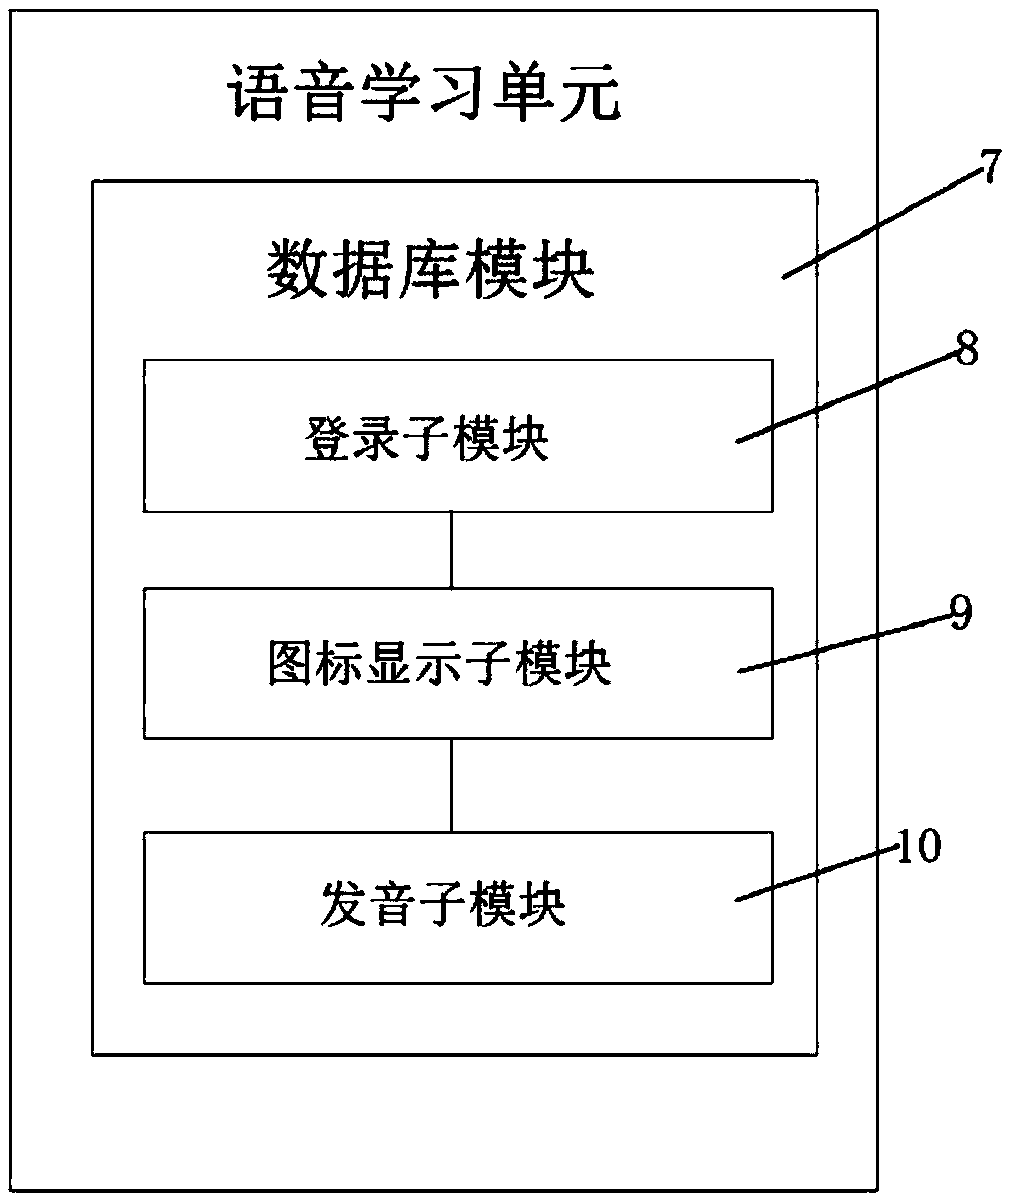 Voice learning system and method